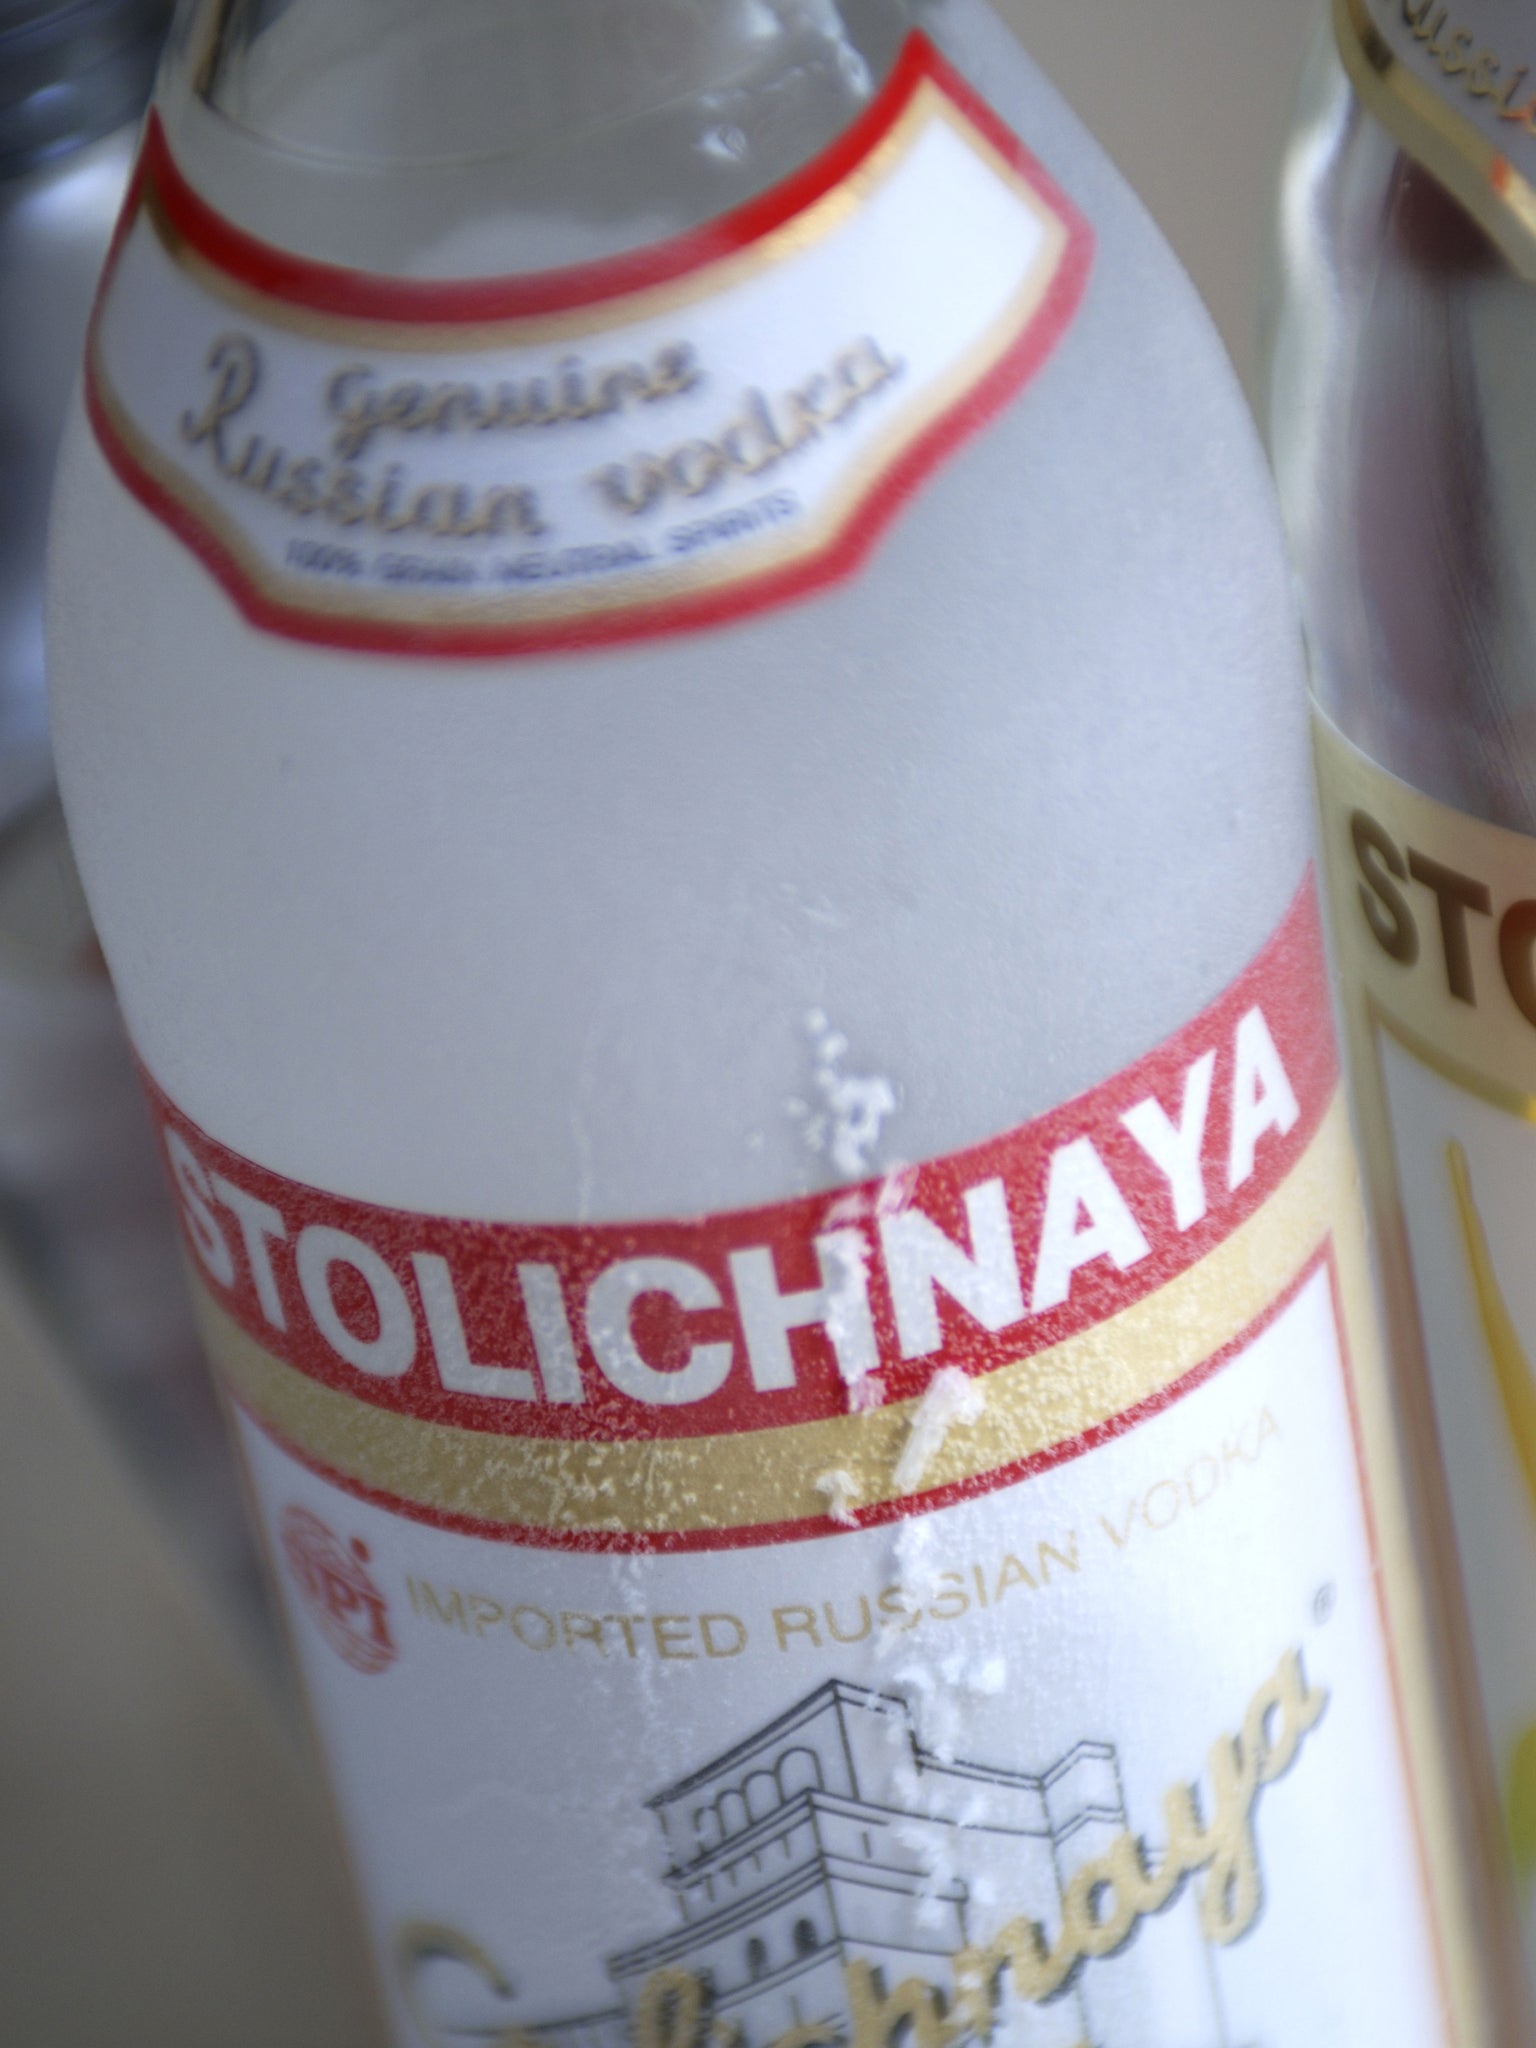 Dump Russian Vodka gives birth to #DumpStoli hashtag even though Stolichnaya made in Latvia by a company based in Luxembourg